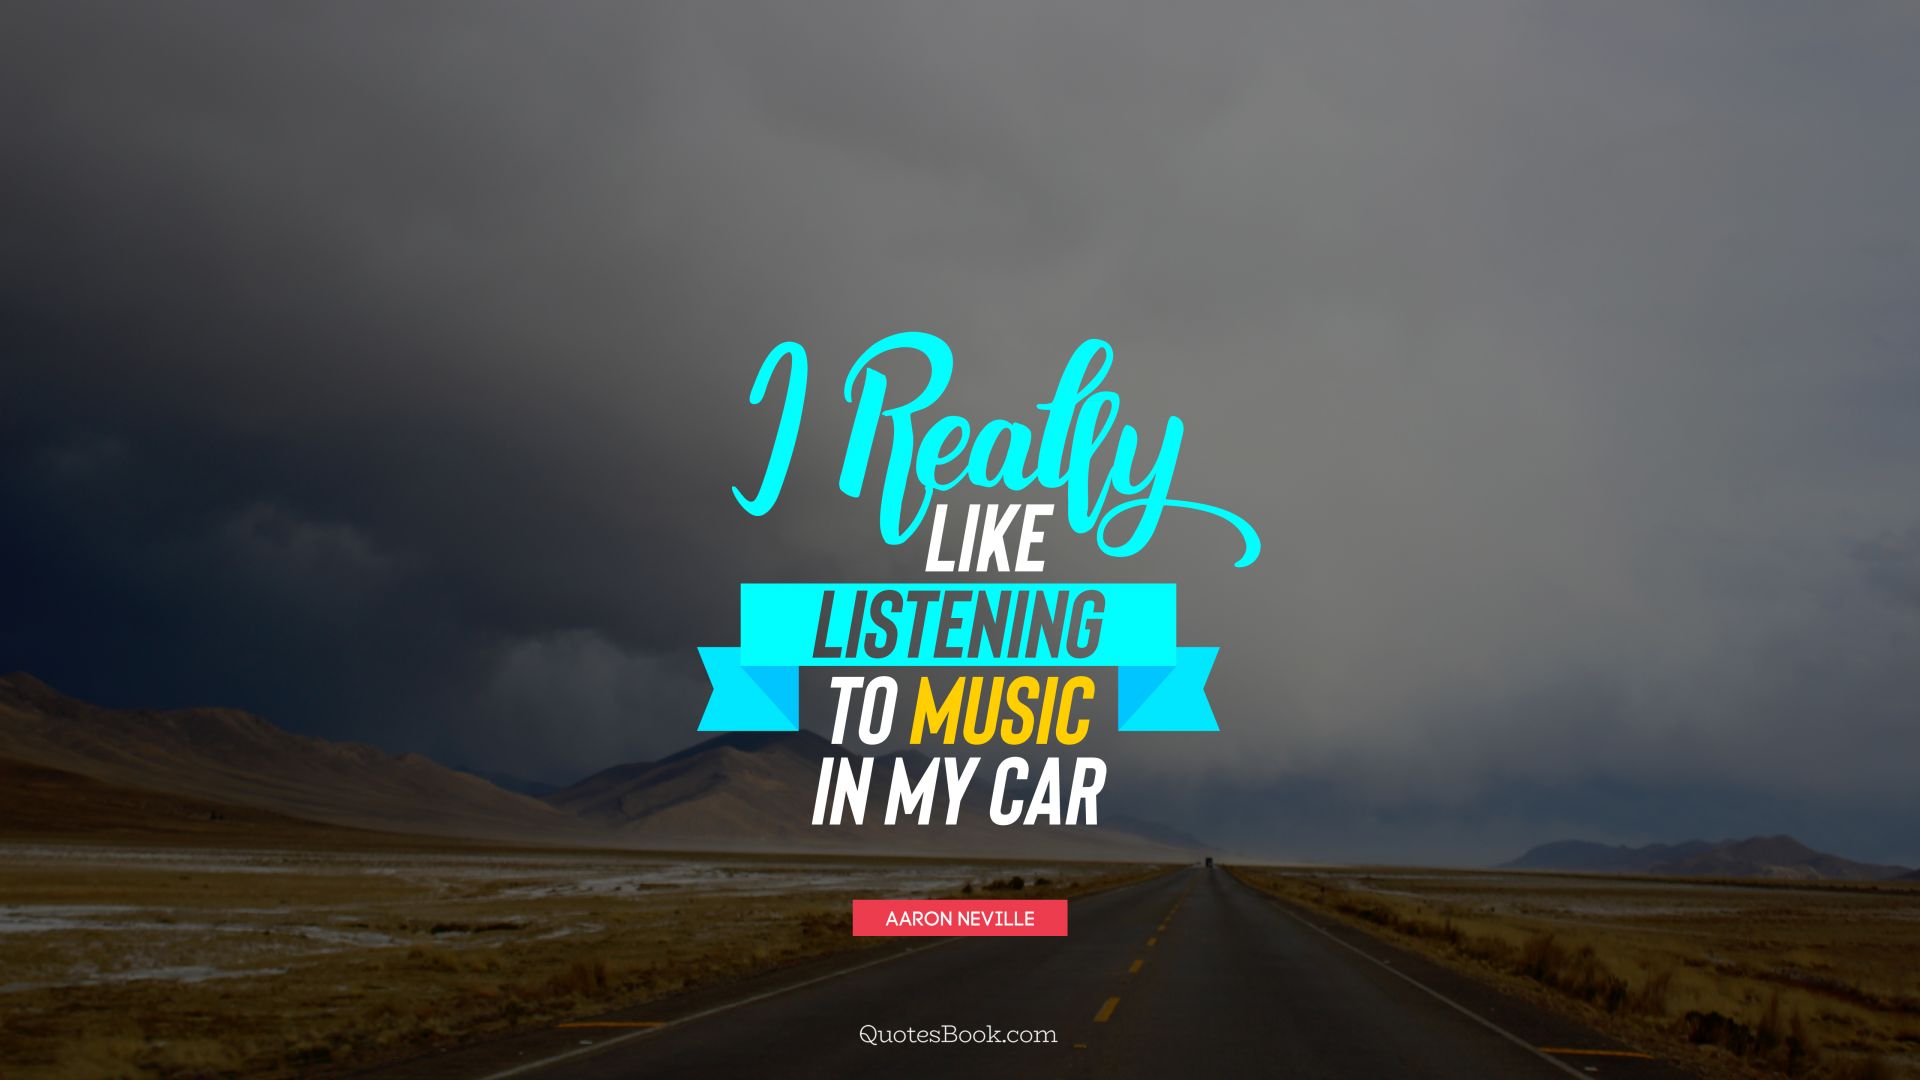 I really like listening to music in my car. - Quote by Aaron Neville